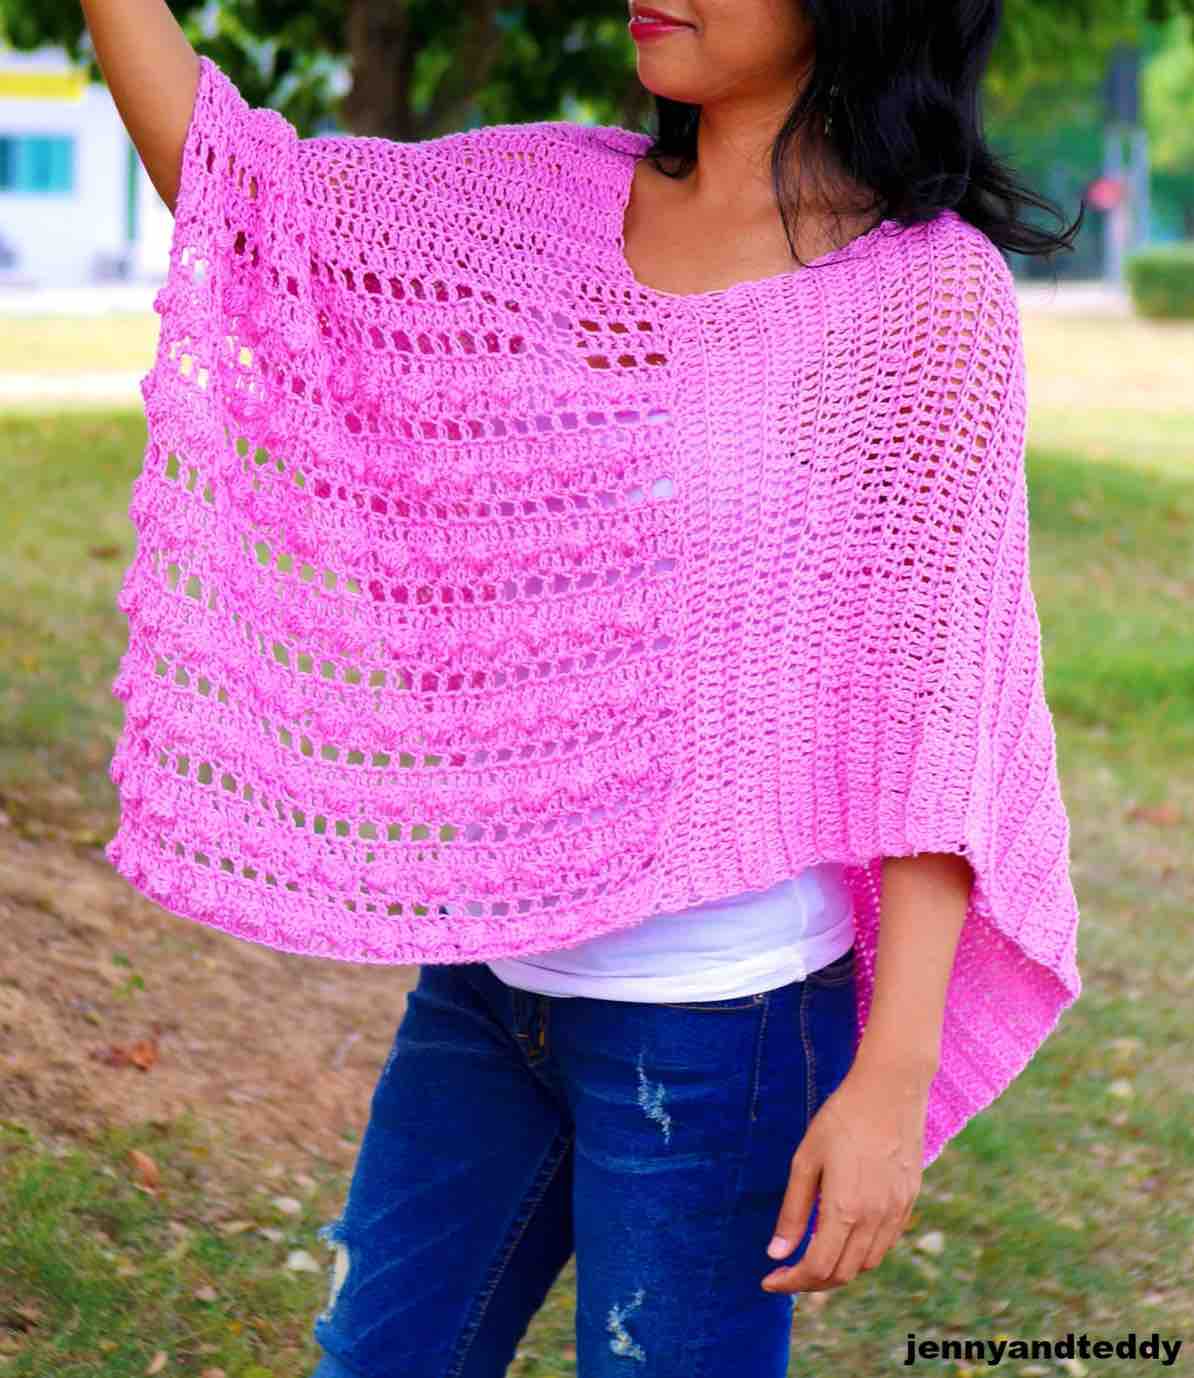 Winter Crochet Pattern Collection compiled by itchinforsomestitchin.com